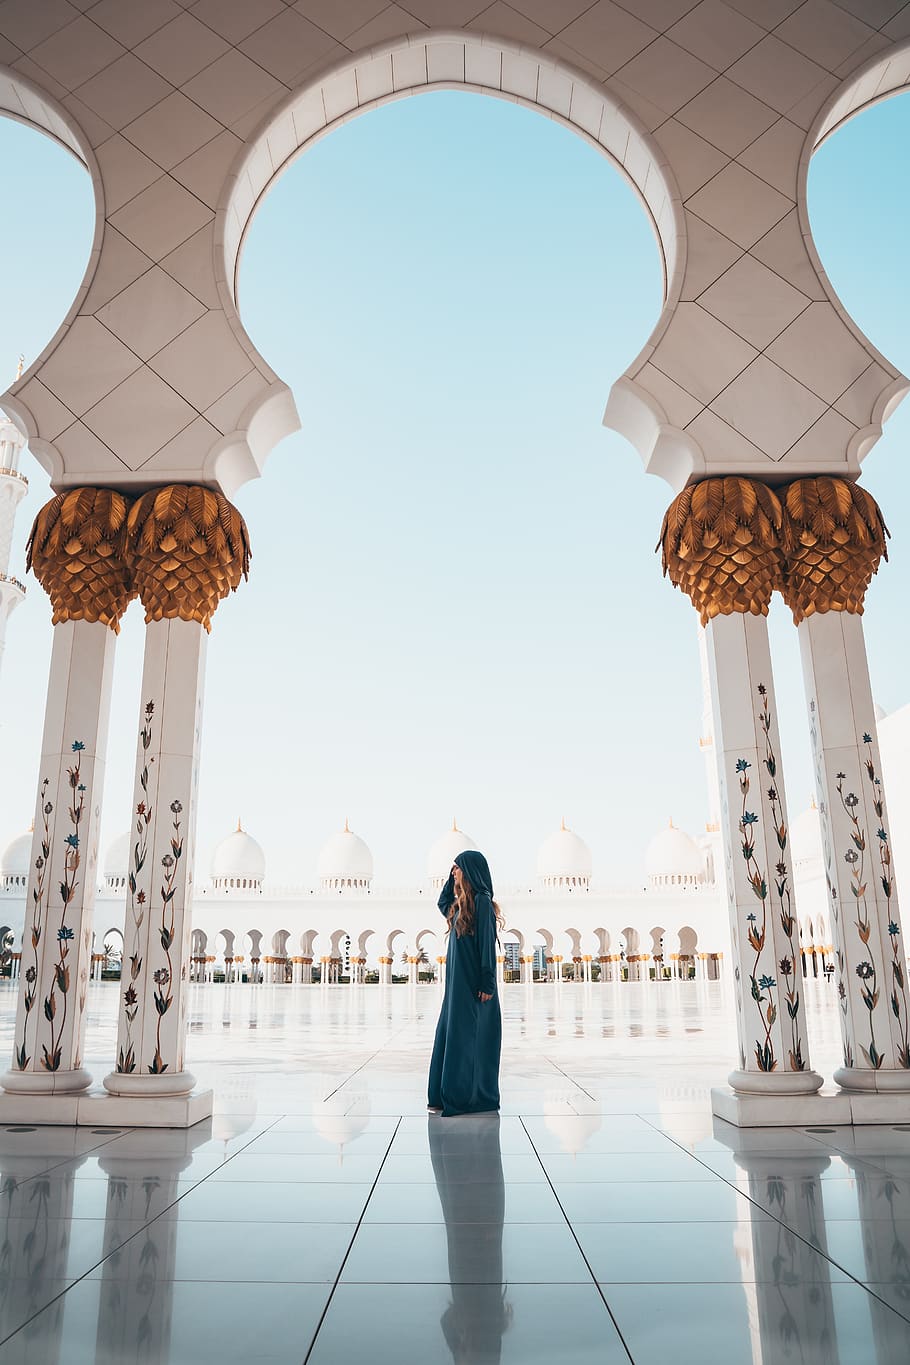 woman, mosque, architecture, building, religion, muslim, sun, summer, marble, dome